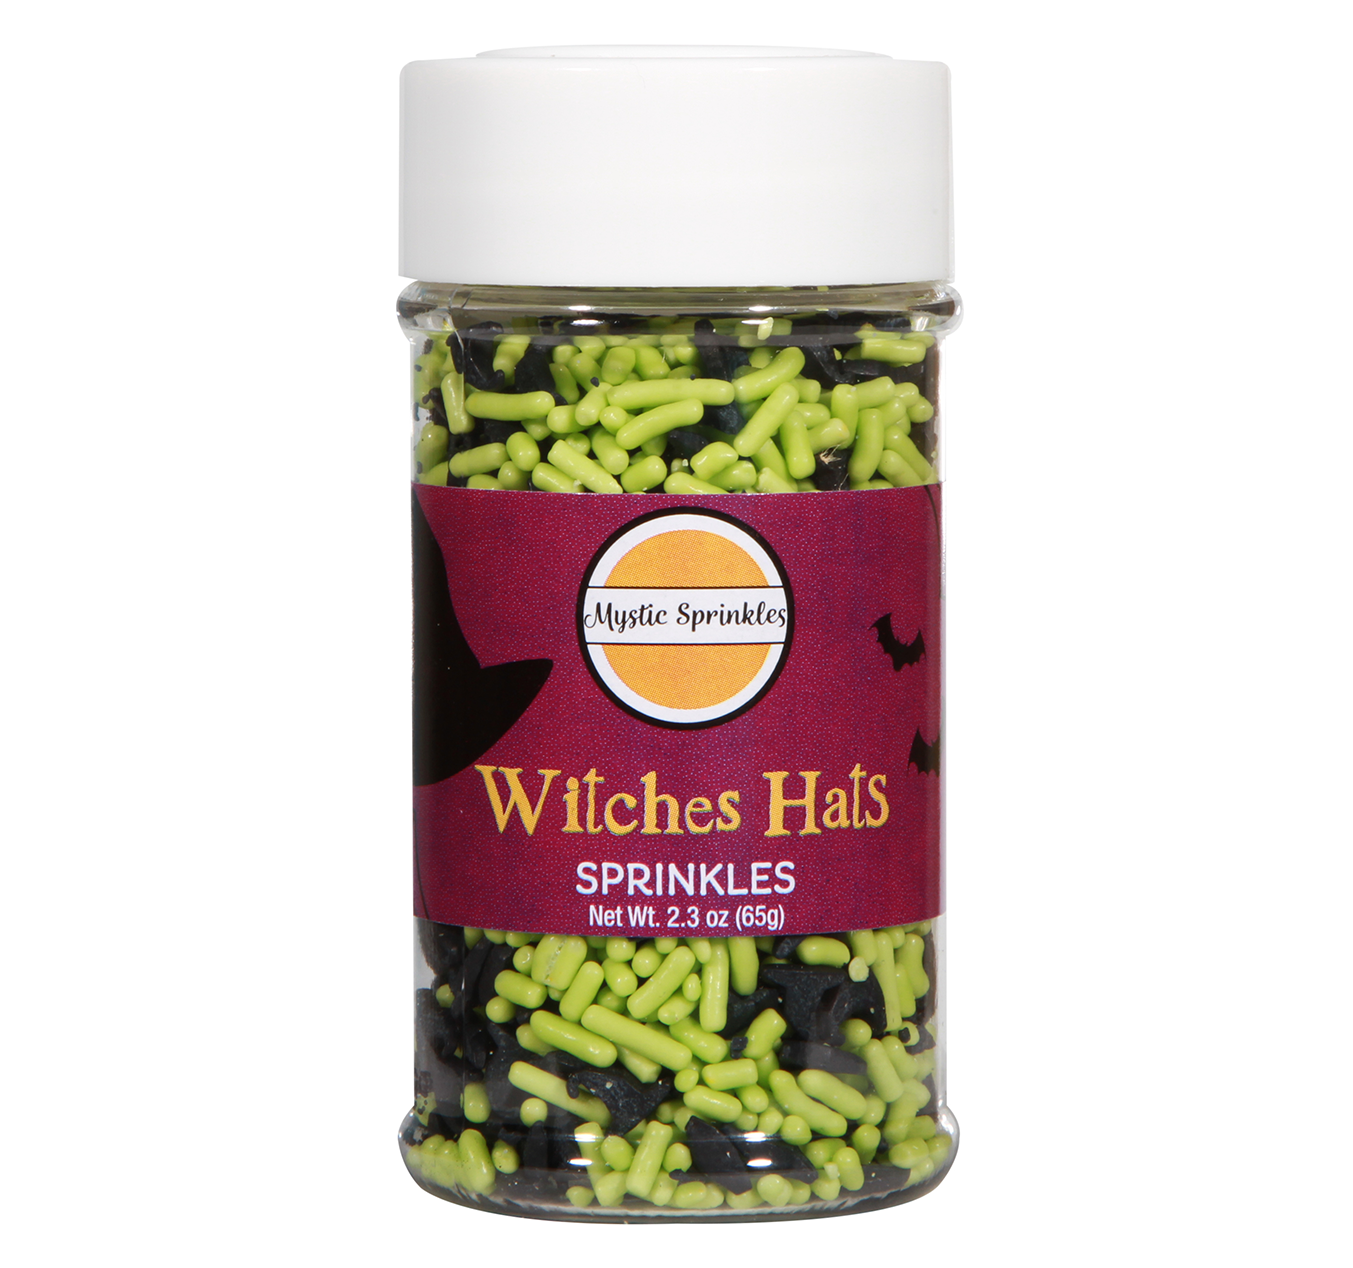 Witches Hats Halloween Sprinkle Mix 2.3oz Bottle